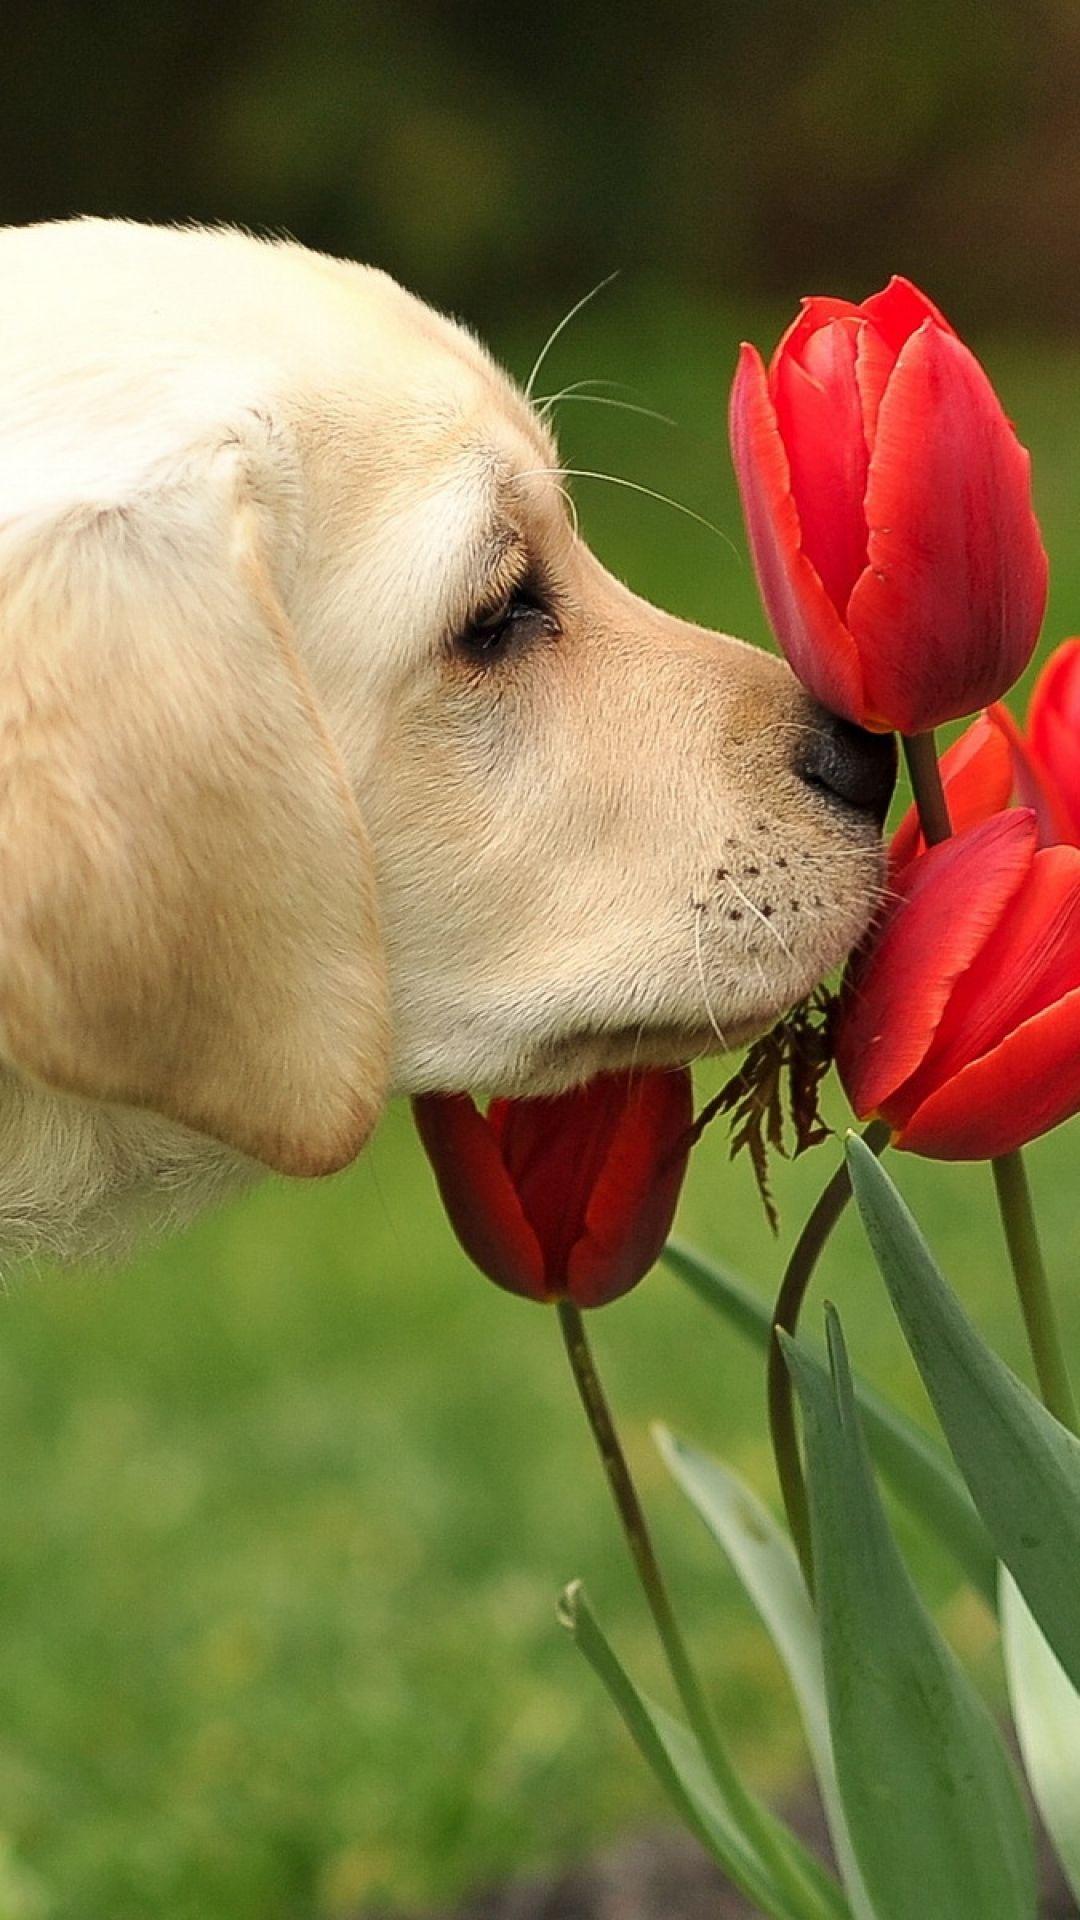 Lab Dogs In Spring Wallpapers - Wallpaper Cave